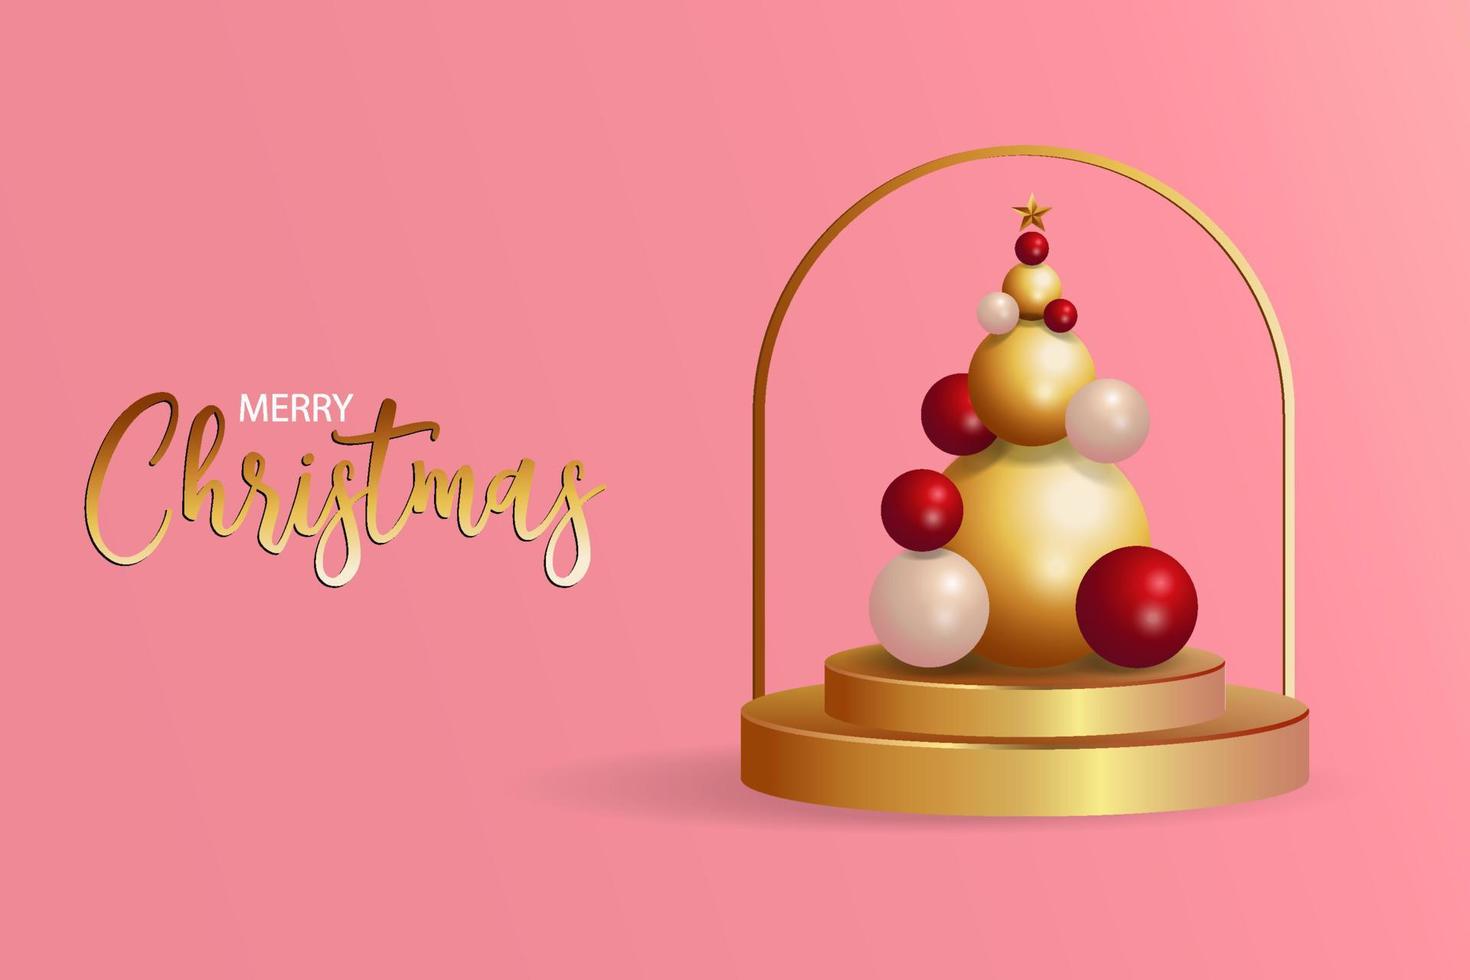 merry christmas background with golden podium and abstract tree christmas shape with color gold, red, and white. vector design